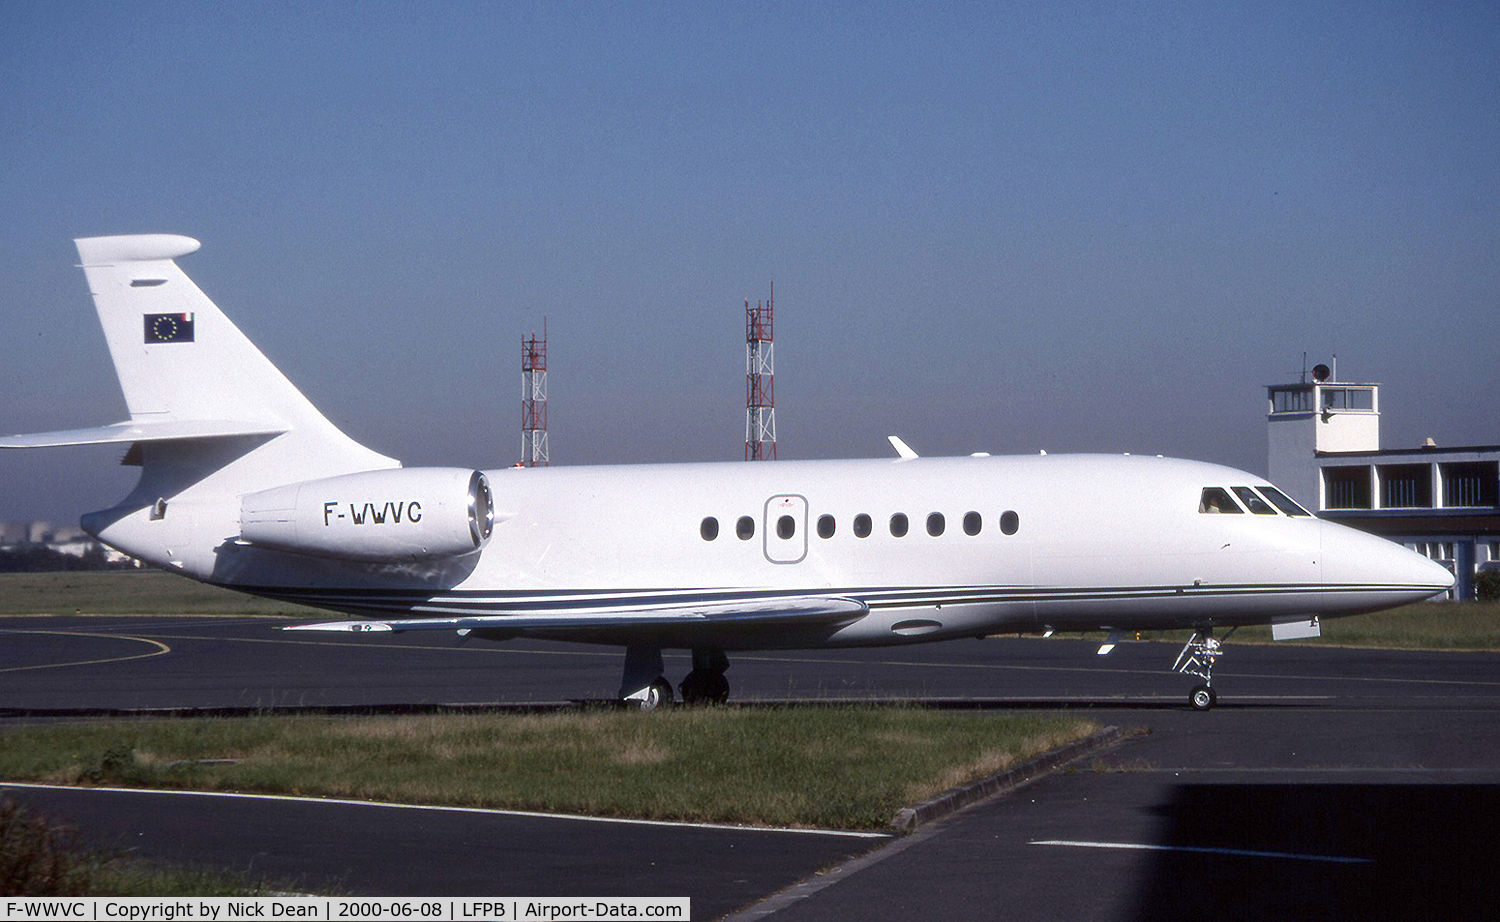 F-WWVC, 2000 Dassault Falcon 2000 C/N 108, Paris Le Bourget (Seen here with the test reg this airframe is currently registered I-FLYV) Selcal DH-AQ